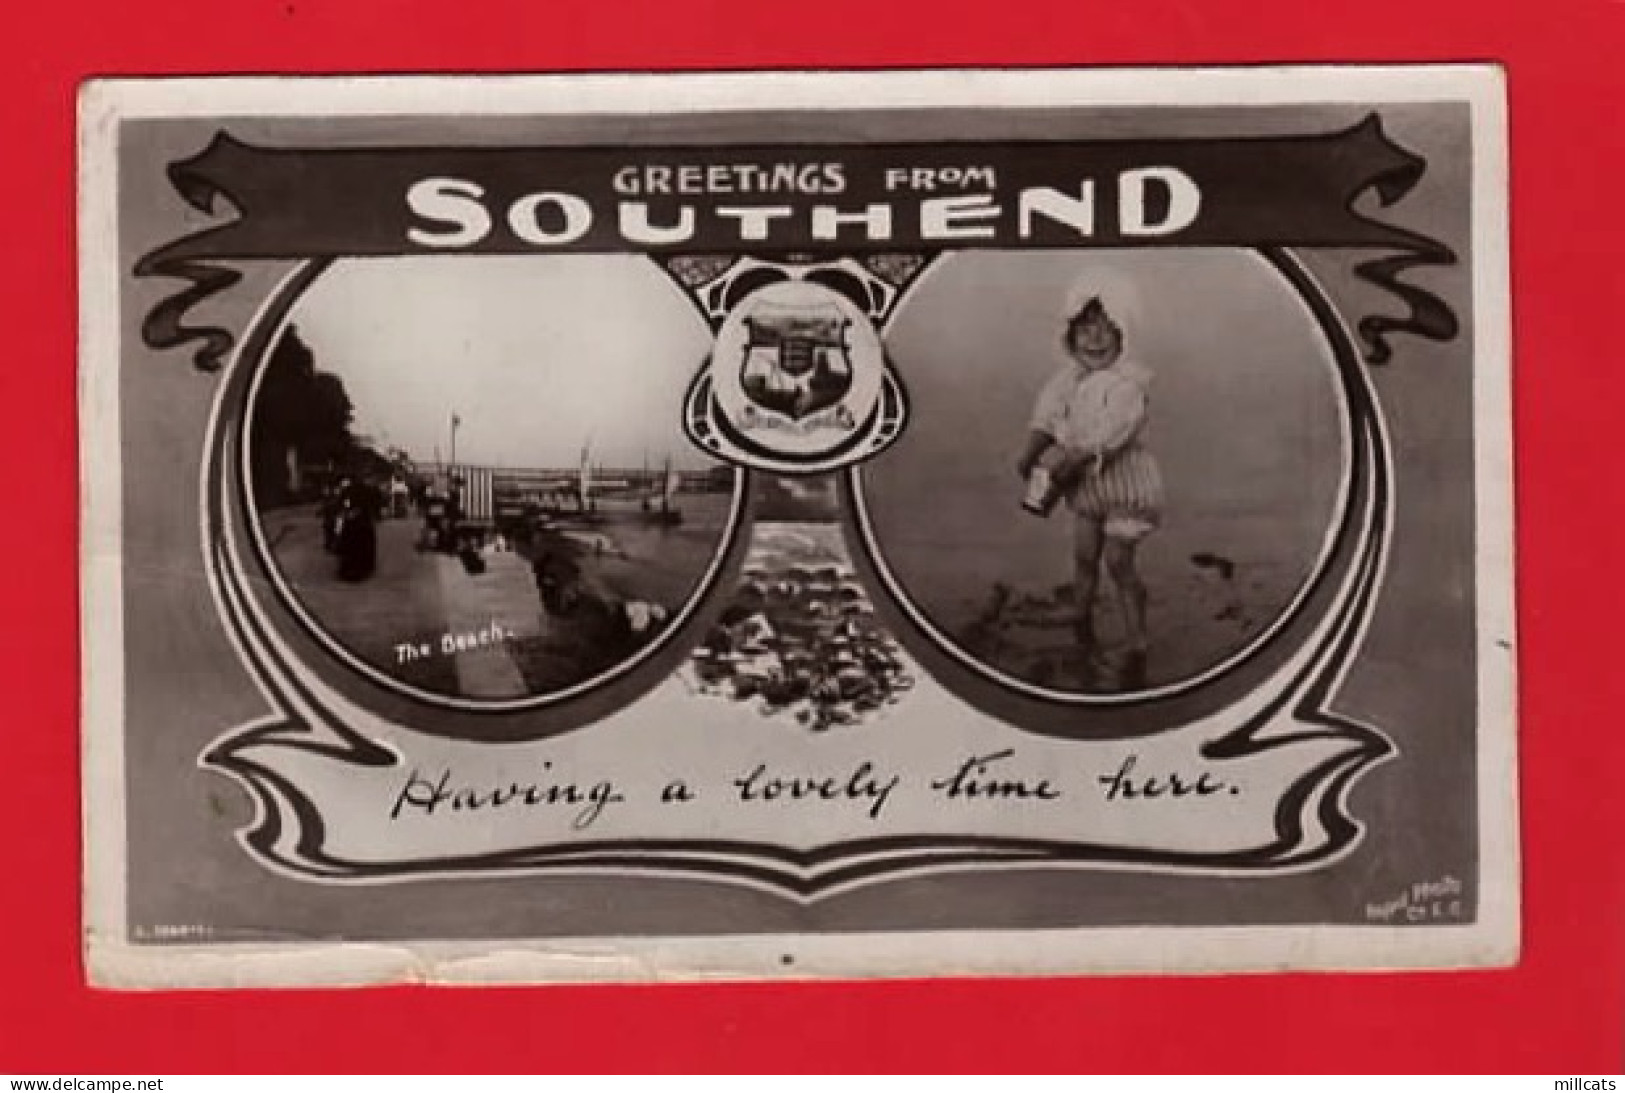 UK ESSEX GREETINGS FROM SOUTHEND 2 VIEW +HERALDIC CREST  RP Pu 1910 - Southend, Westcliff & Leigh